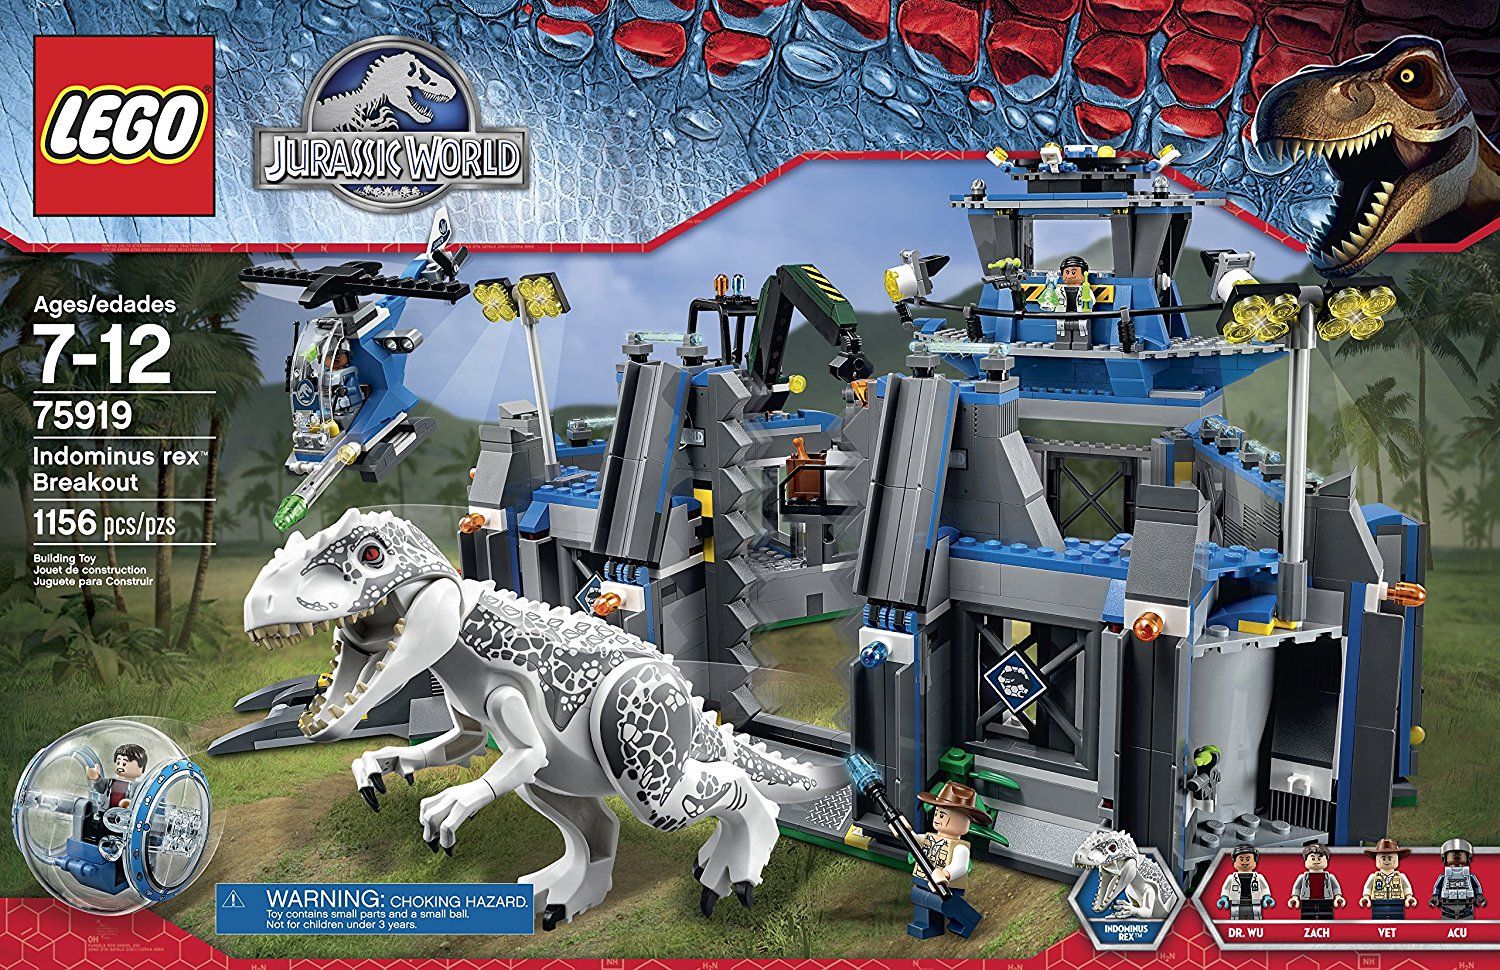 20 LEGO Sets That Completely Spoiled The Movie